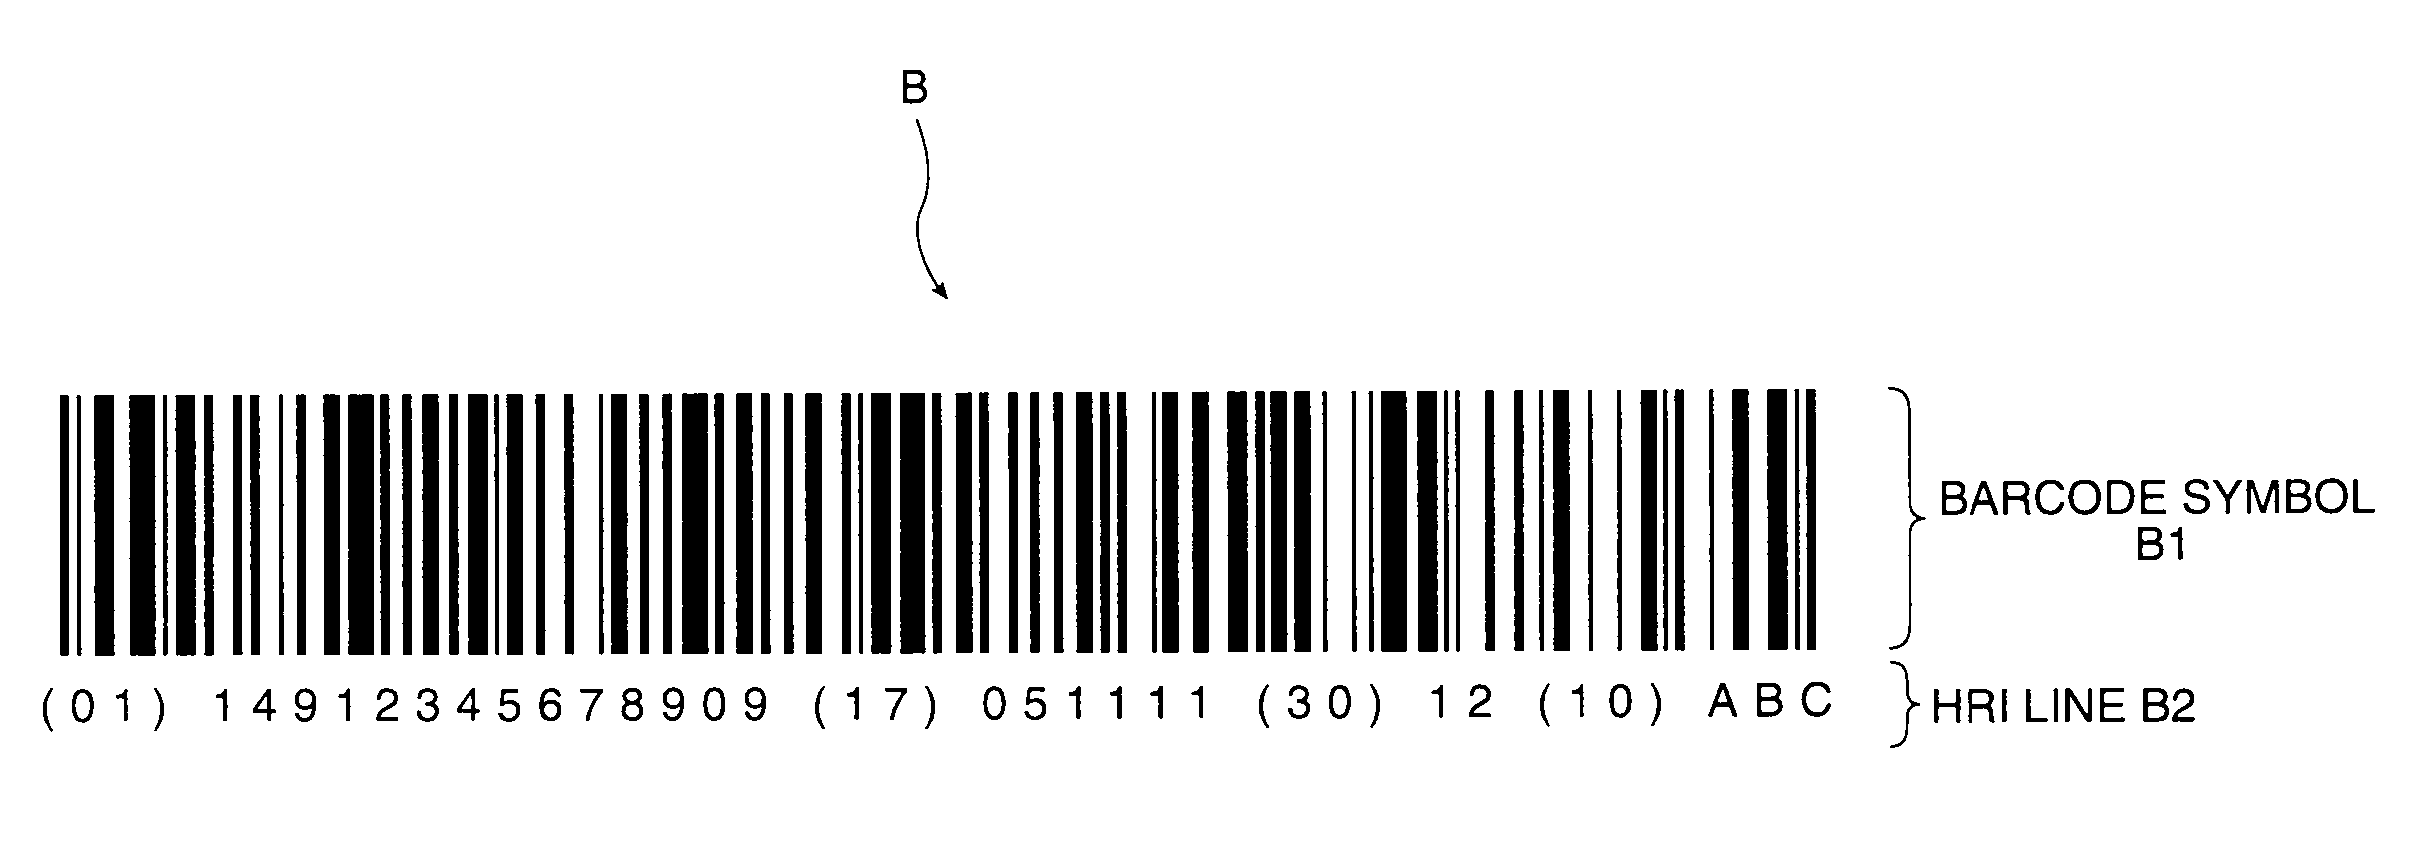 Method and Apparatus for Generating a Barcode with a Human Readable Interpretation, a Printing Apparatus, and a Program